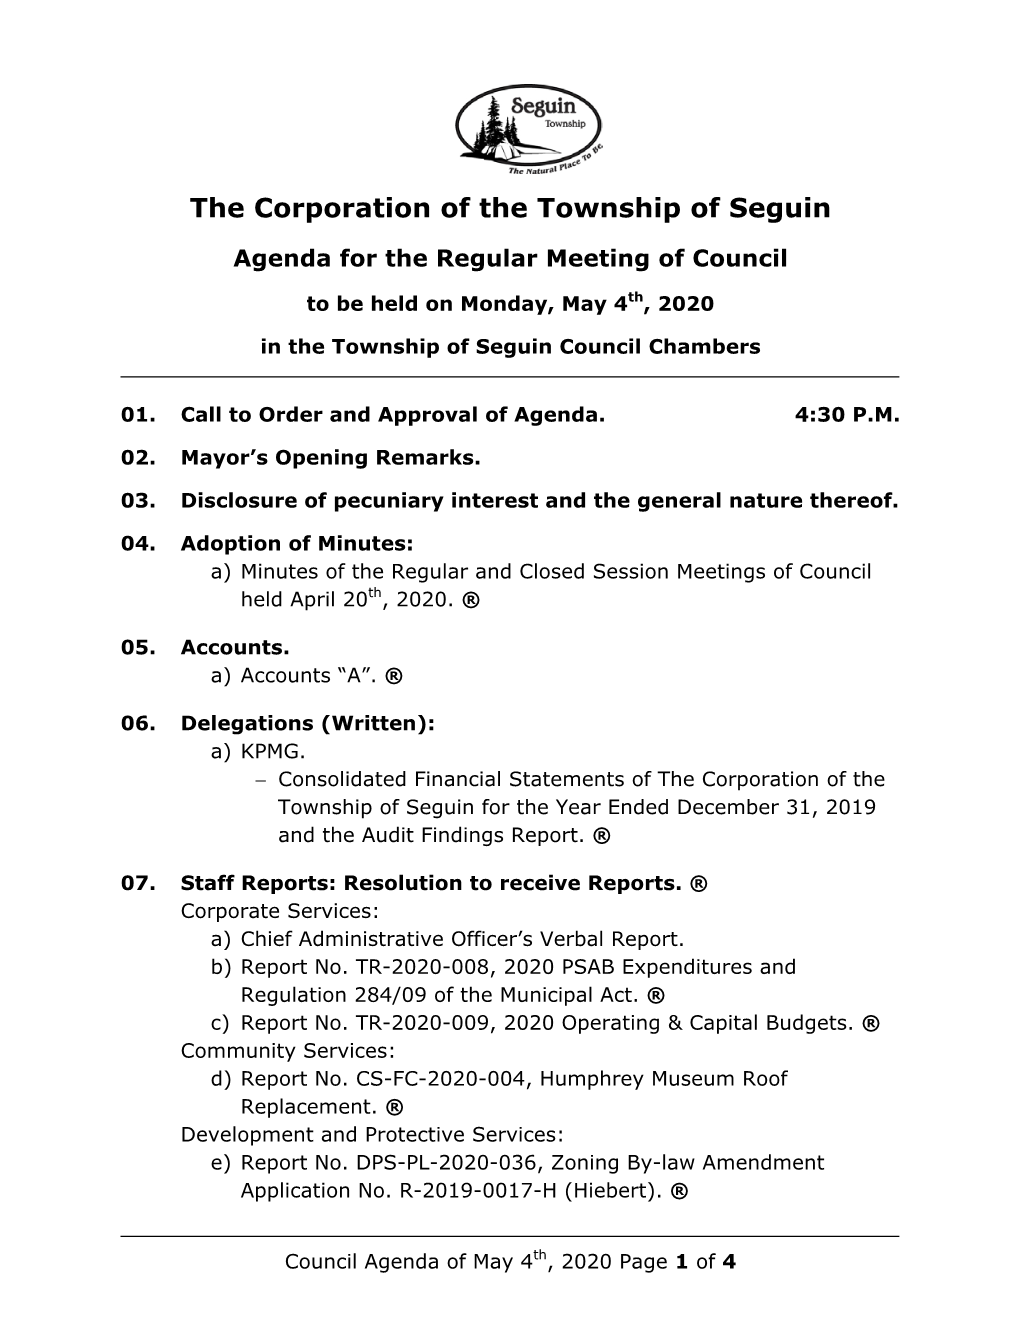 The Corporation of the Township of Seguin Audit